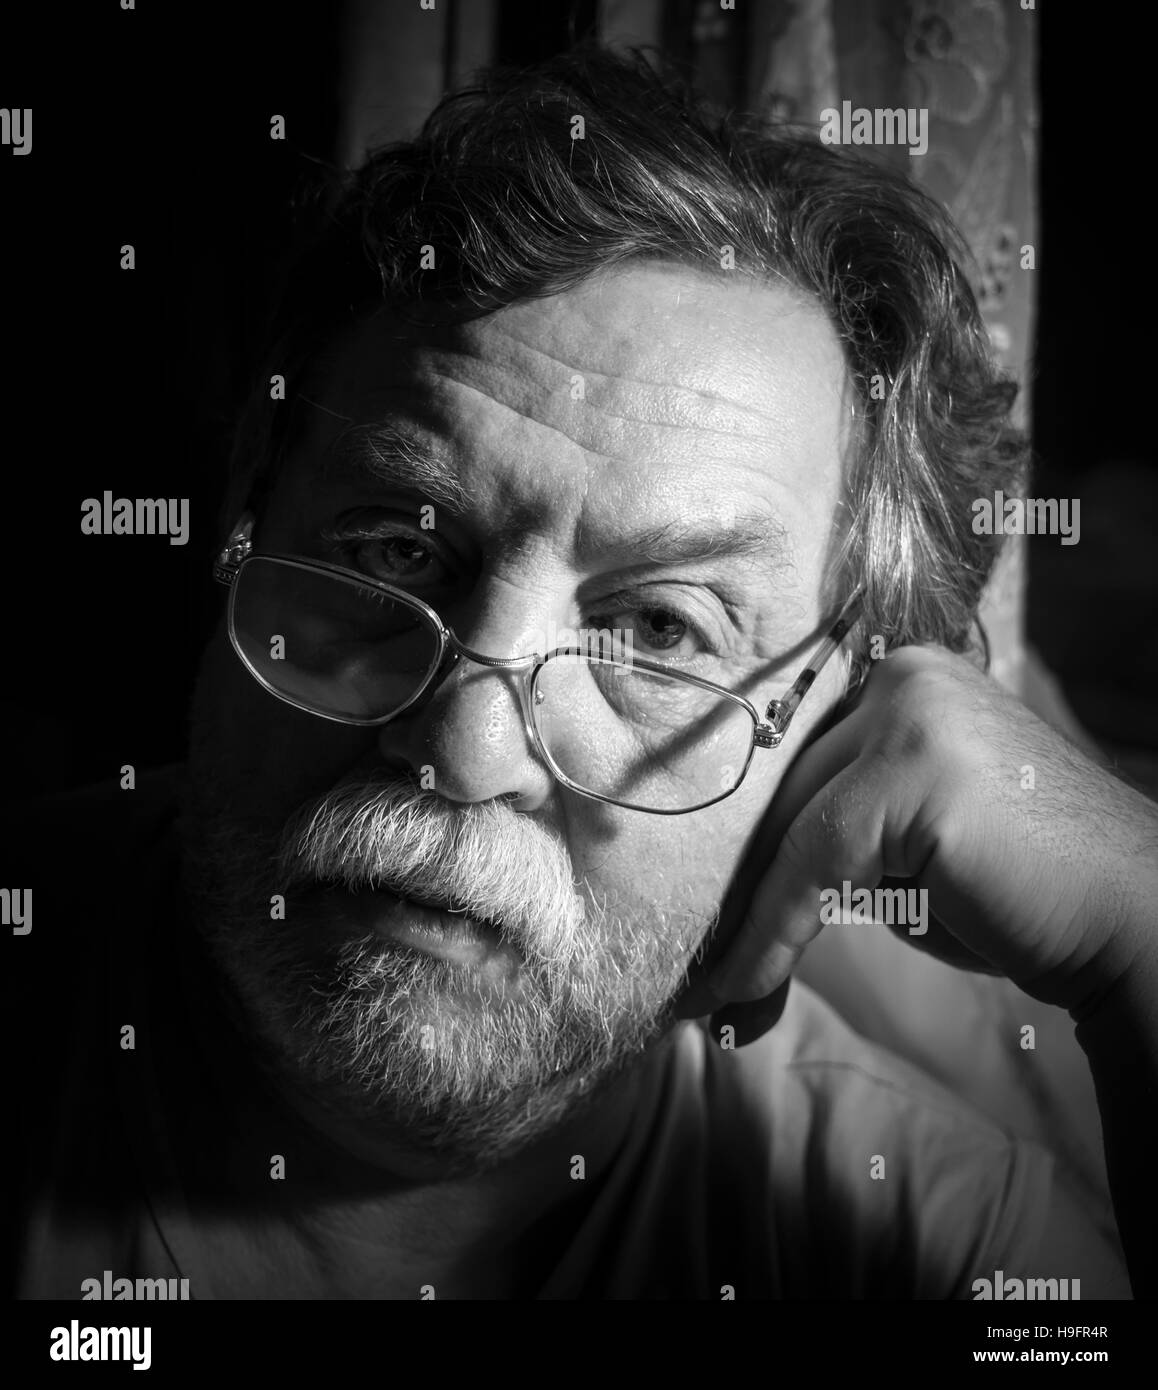 Black and white monochrome photo. Portrait of a sad adult man with a gray mustache. 'Real People' series Stock Photo